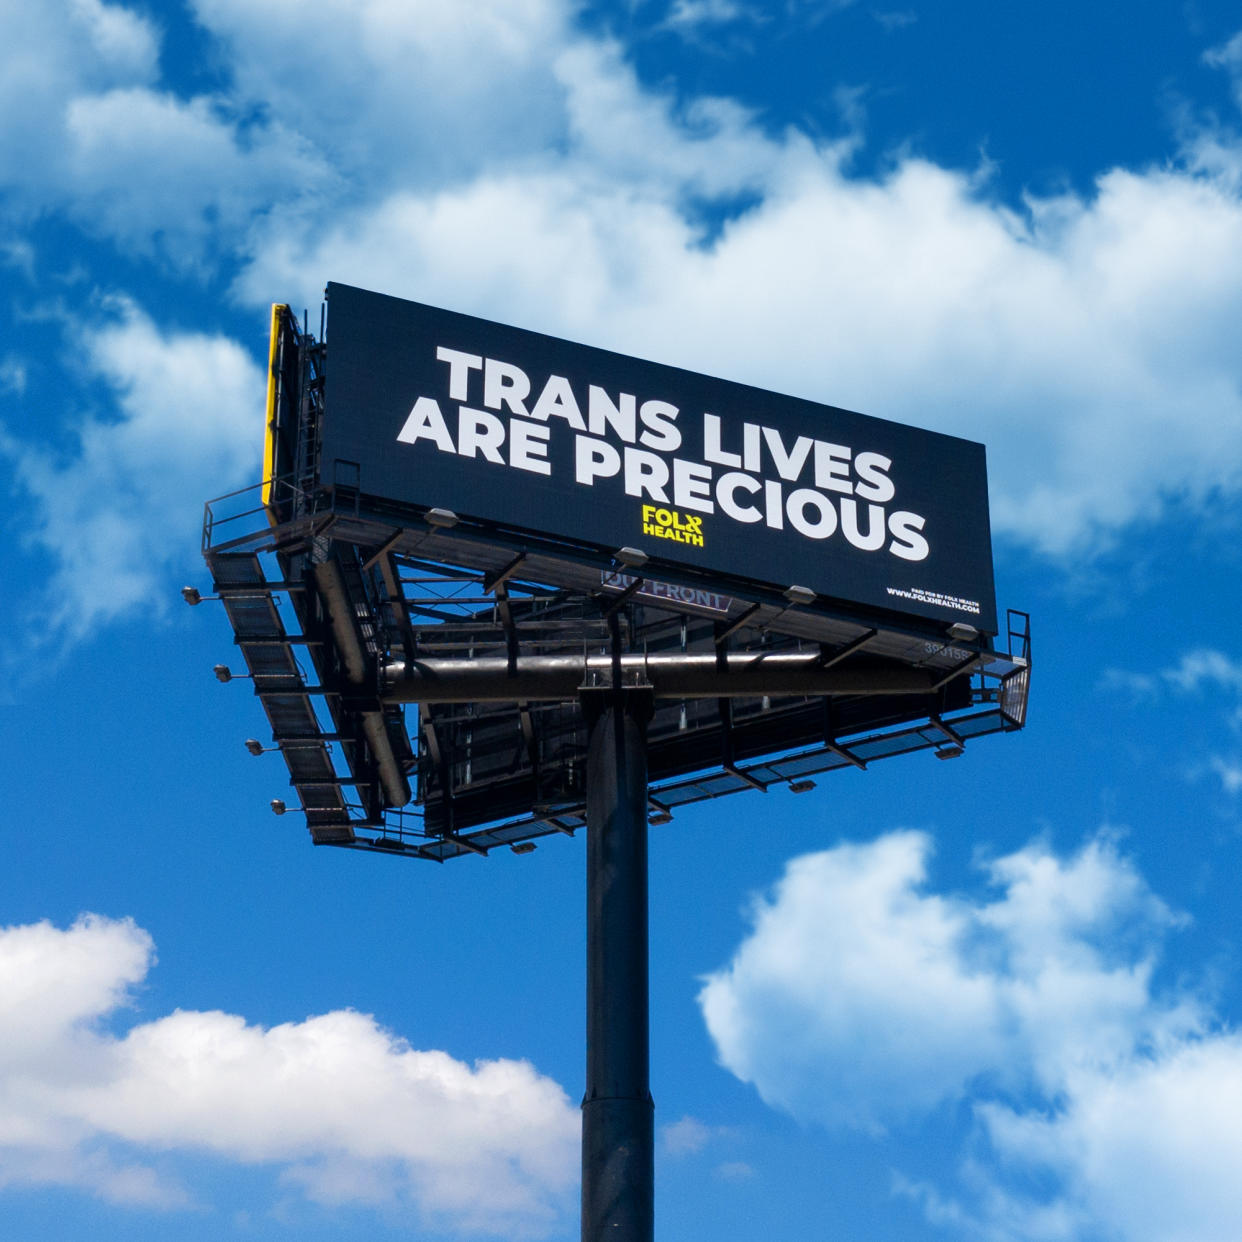 A new telehealth company serving the LGBTQ community launched a Florida billboard campaign that reads “Trans Lives Are Precious” as a message to former President Donald Trump. (FOLX Health)